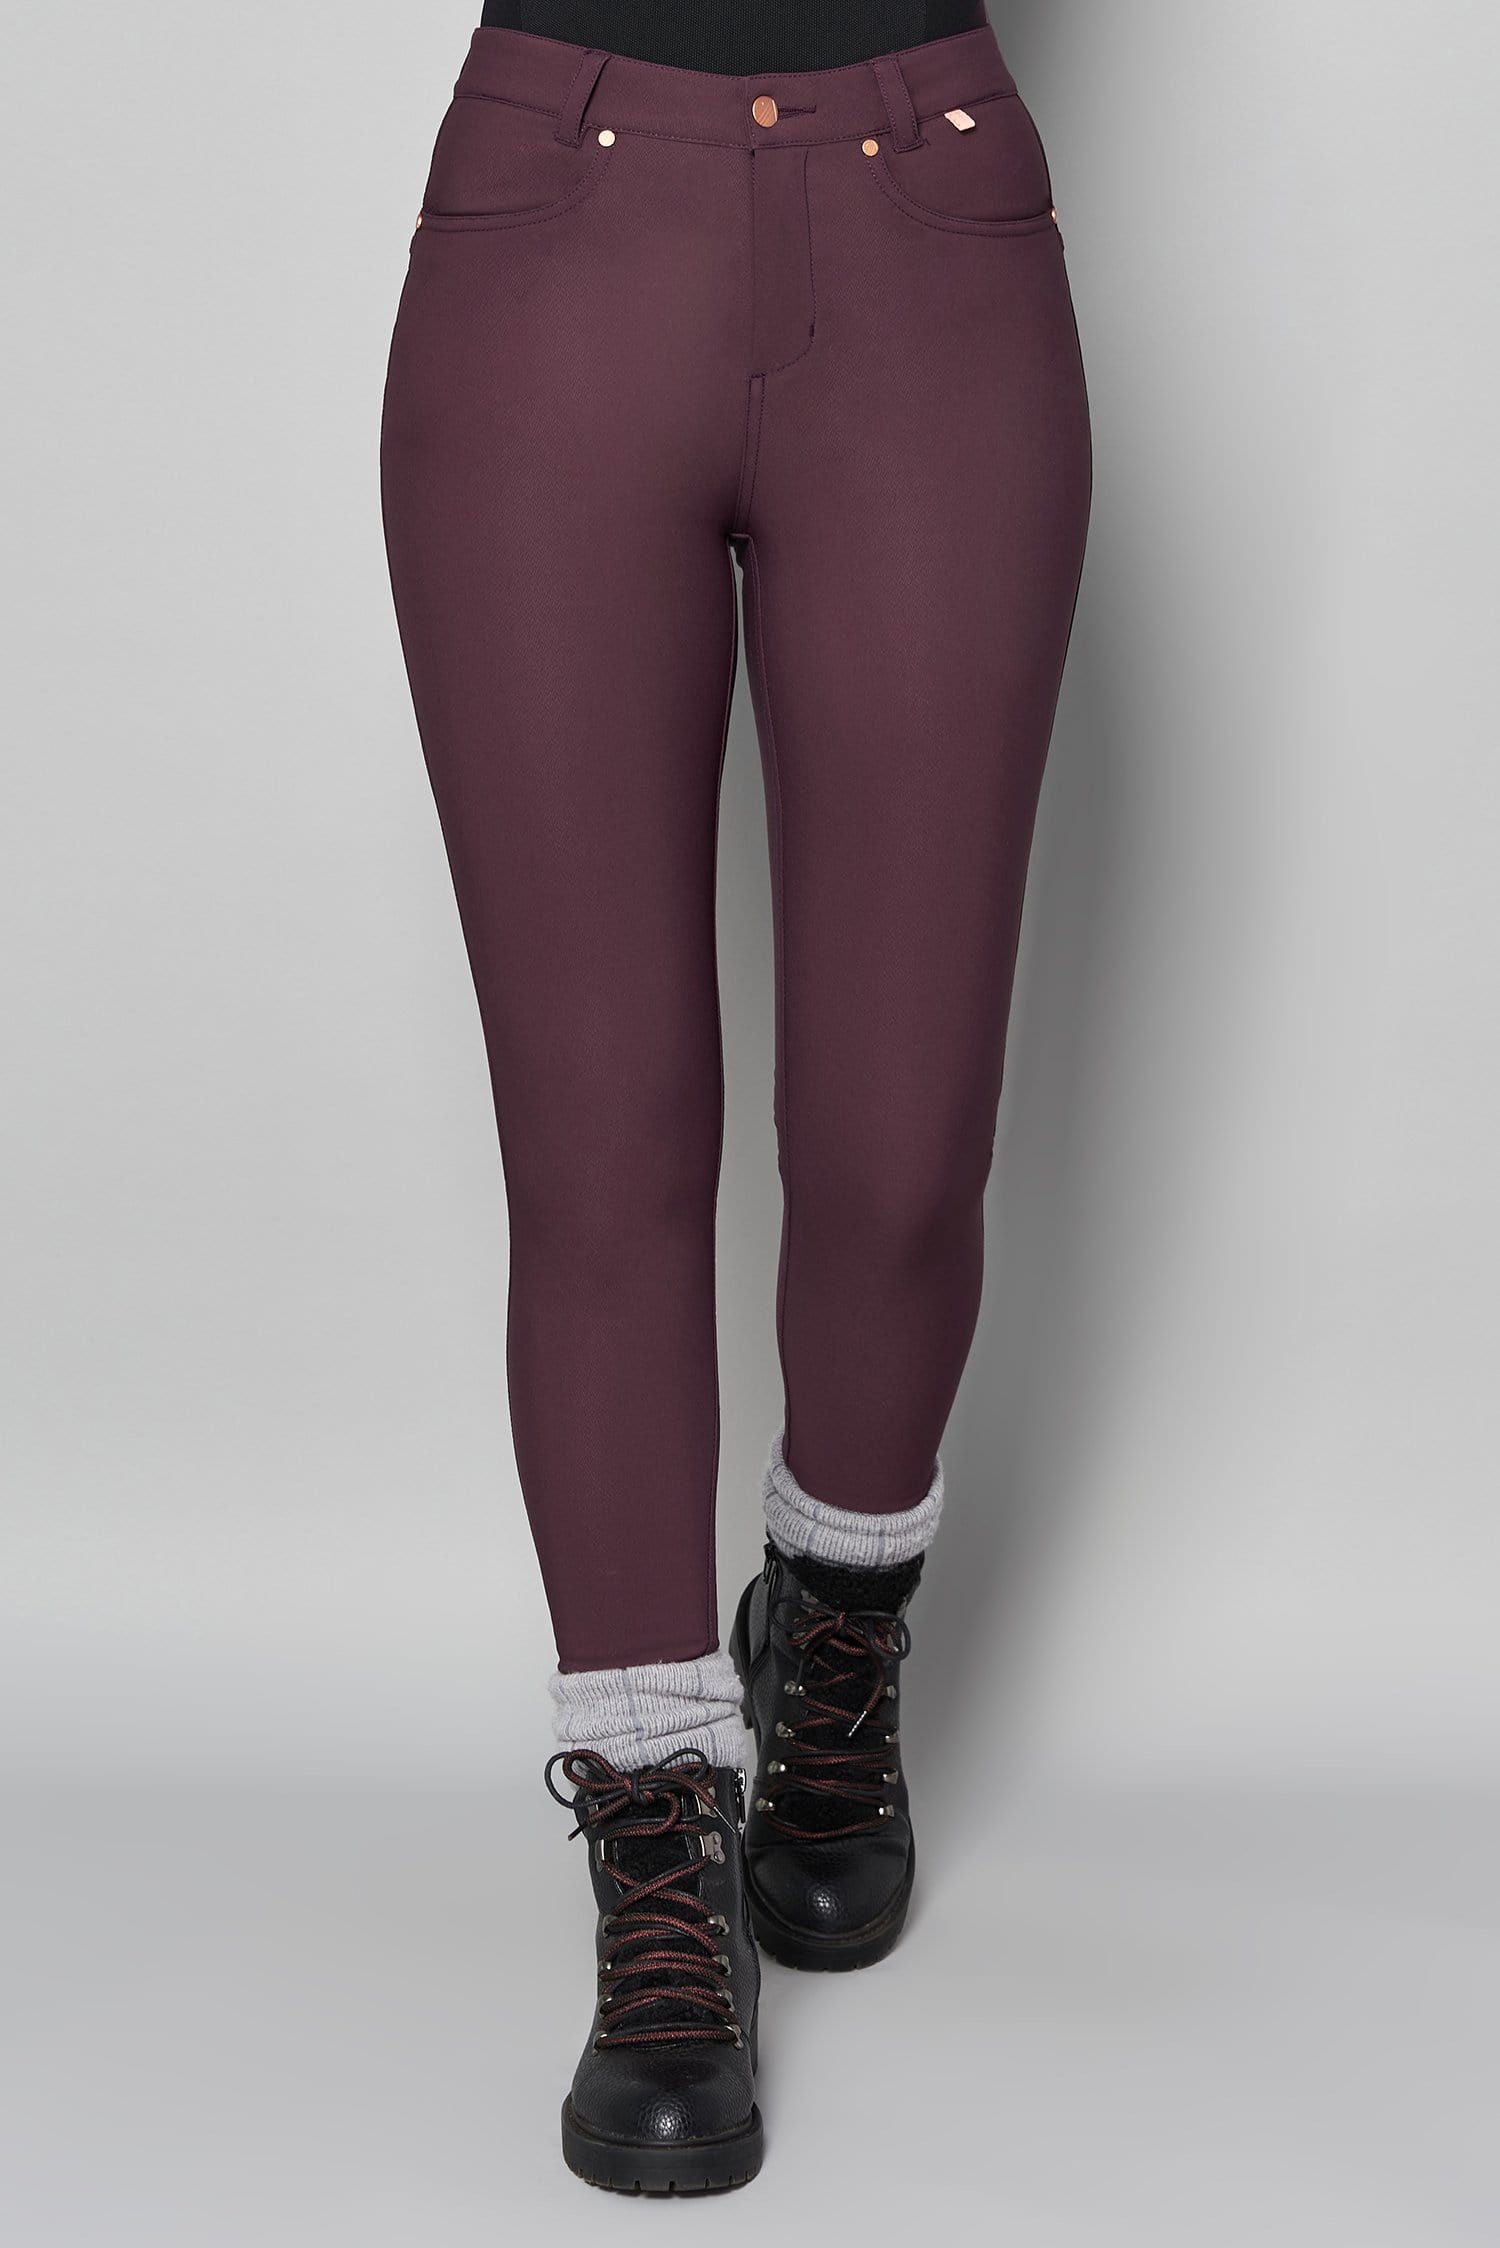 Thermal Skinny Outdoor Trousers - Aubergine - 36r / Uk18 - Womens - Acai Outdoorwear